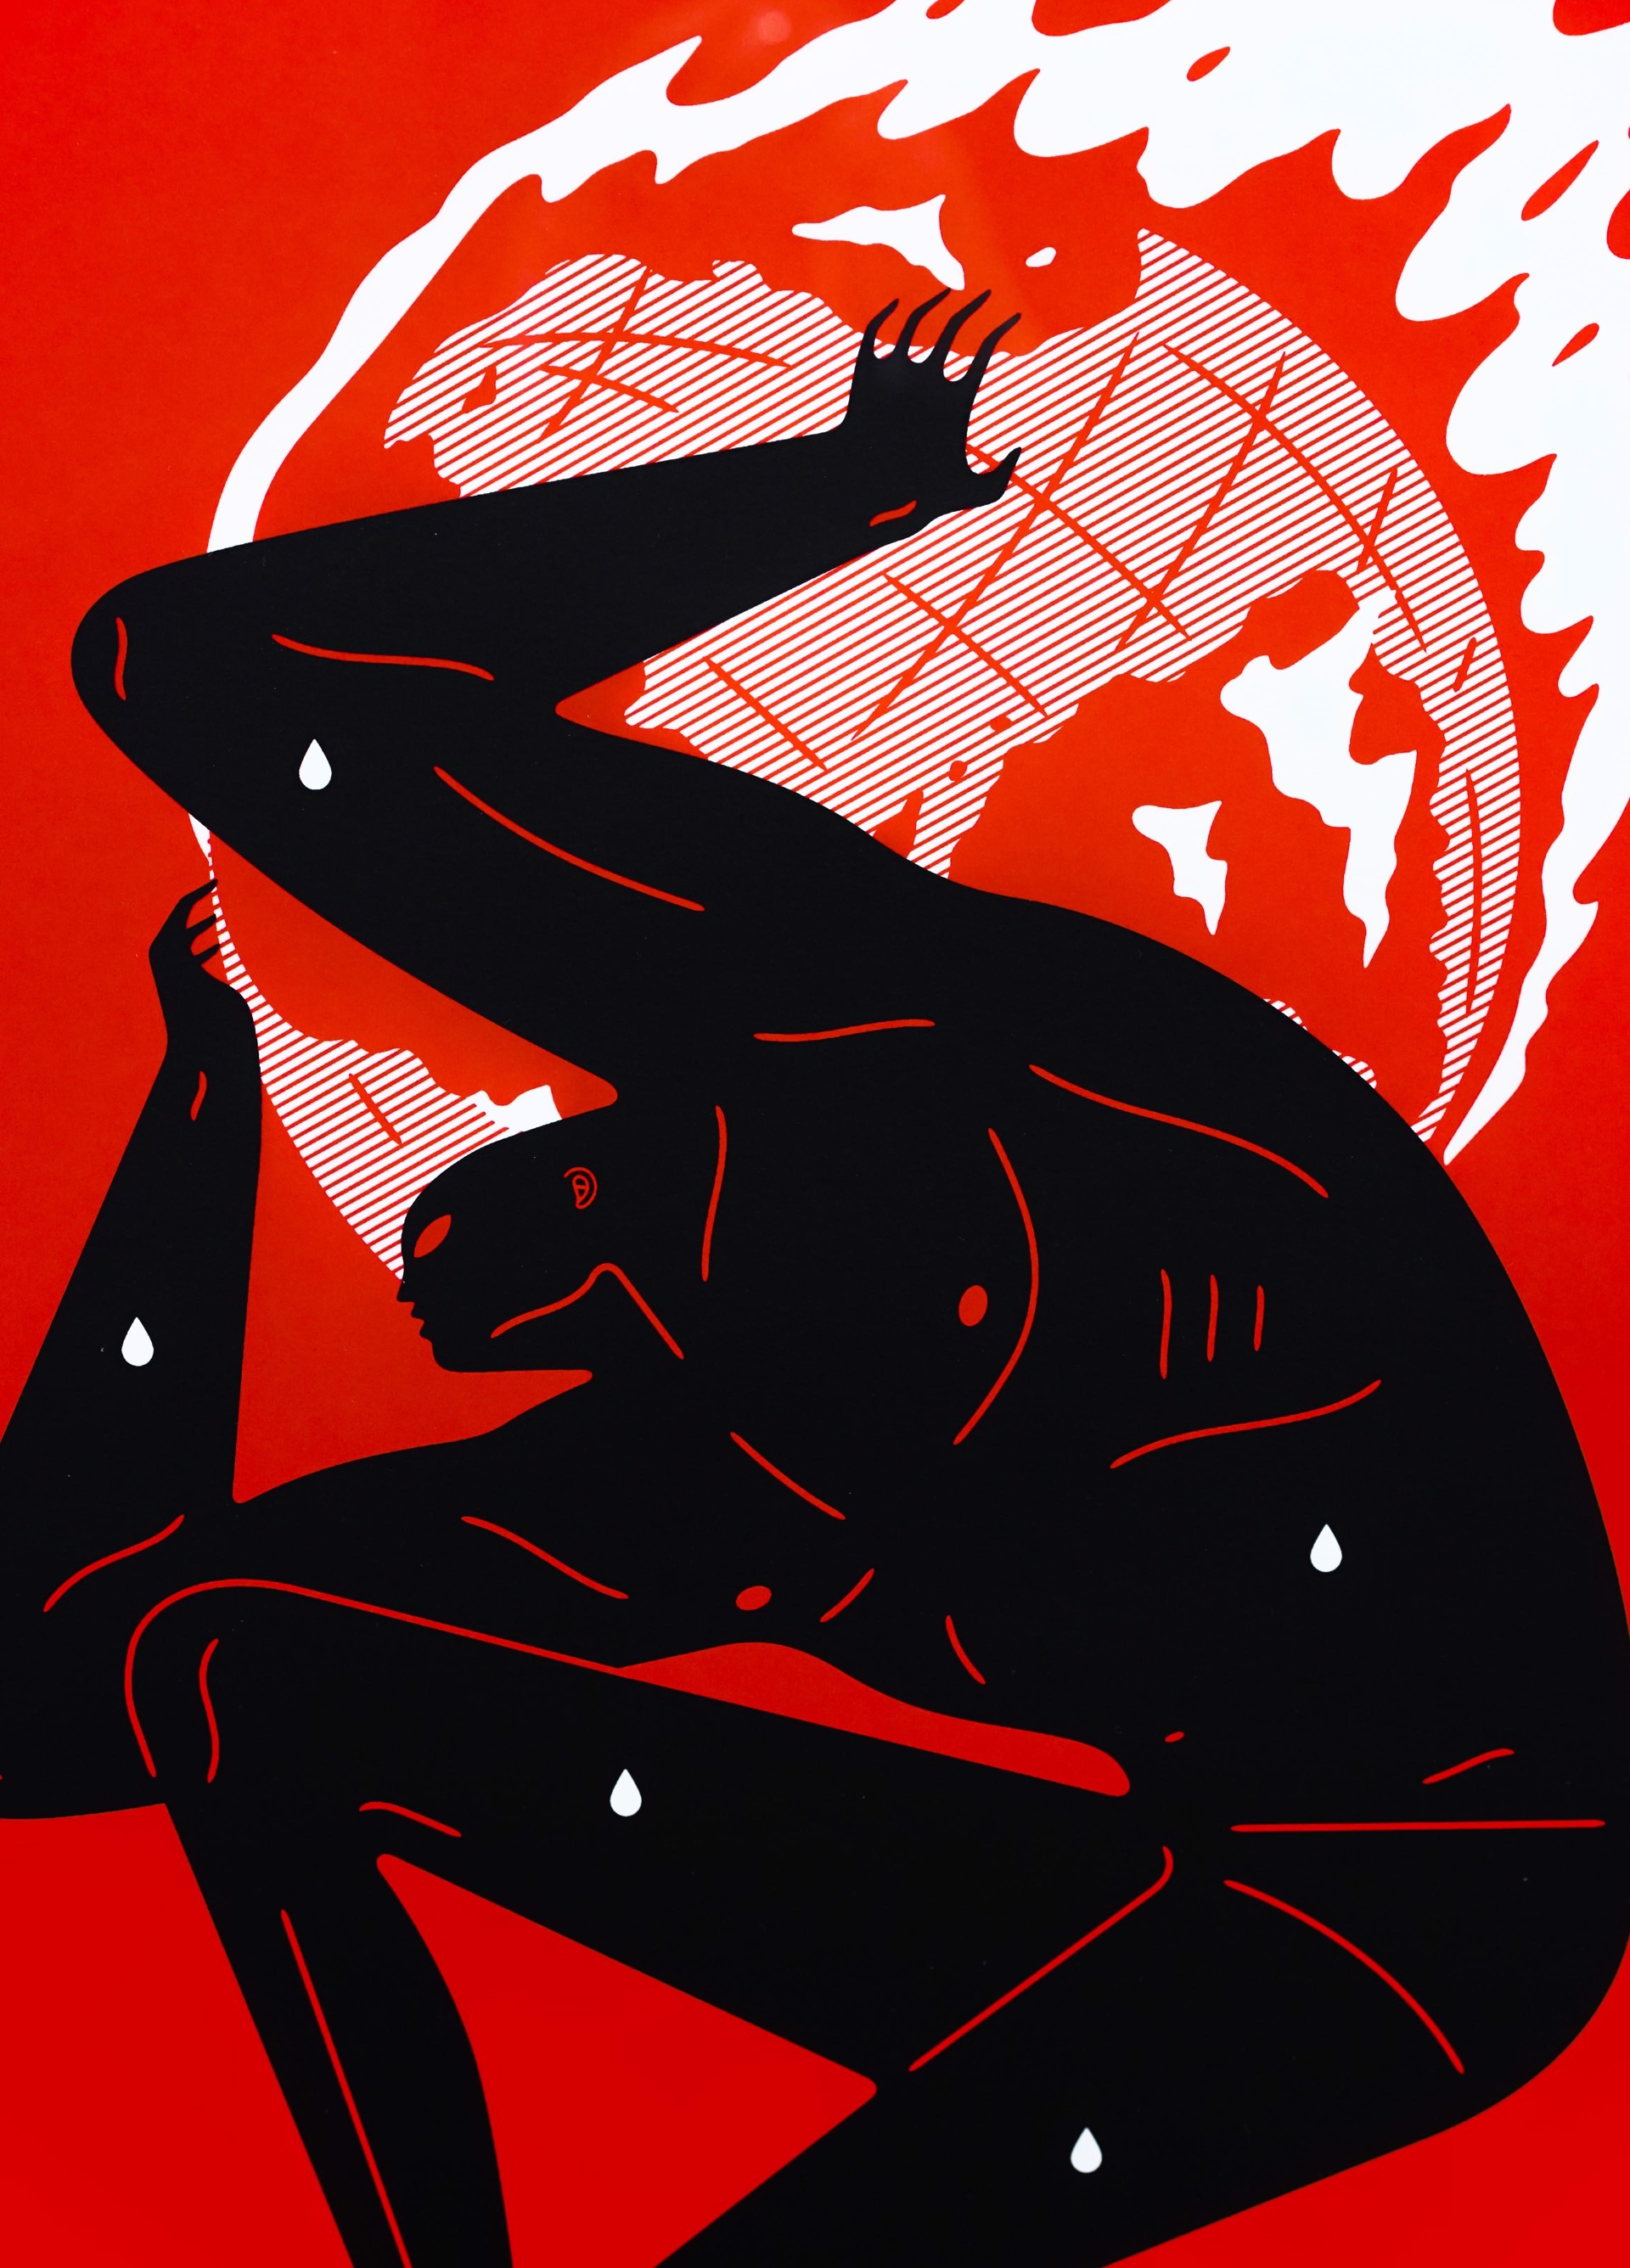 World on Fire (Red), (37,125) by Cleon Peterson